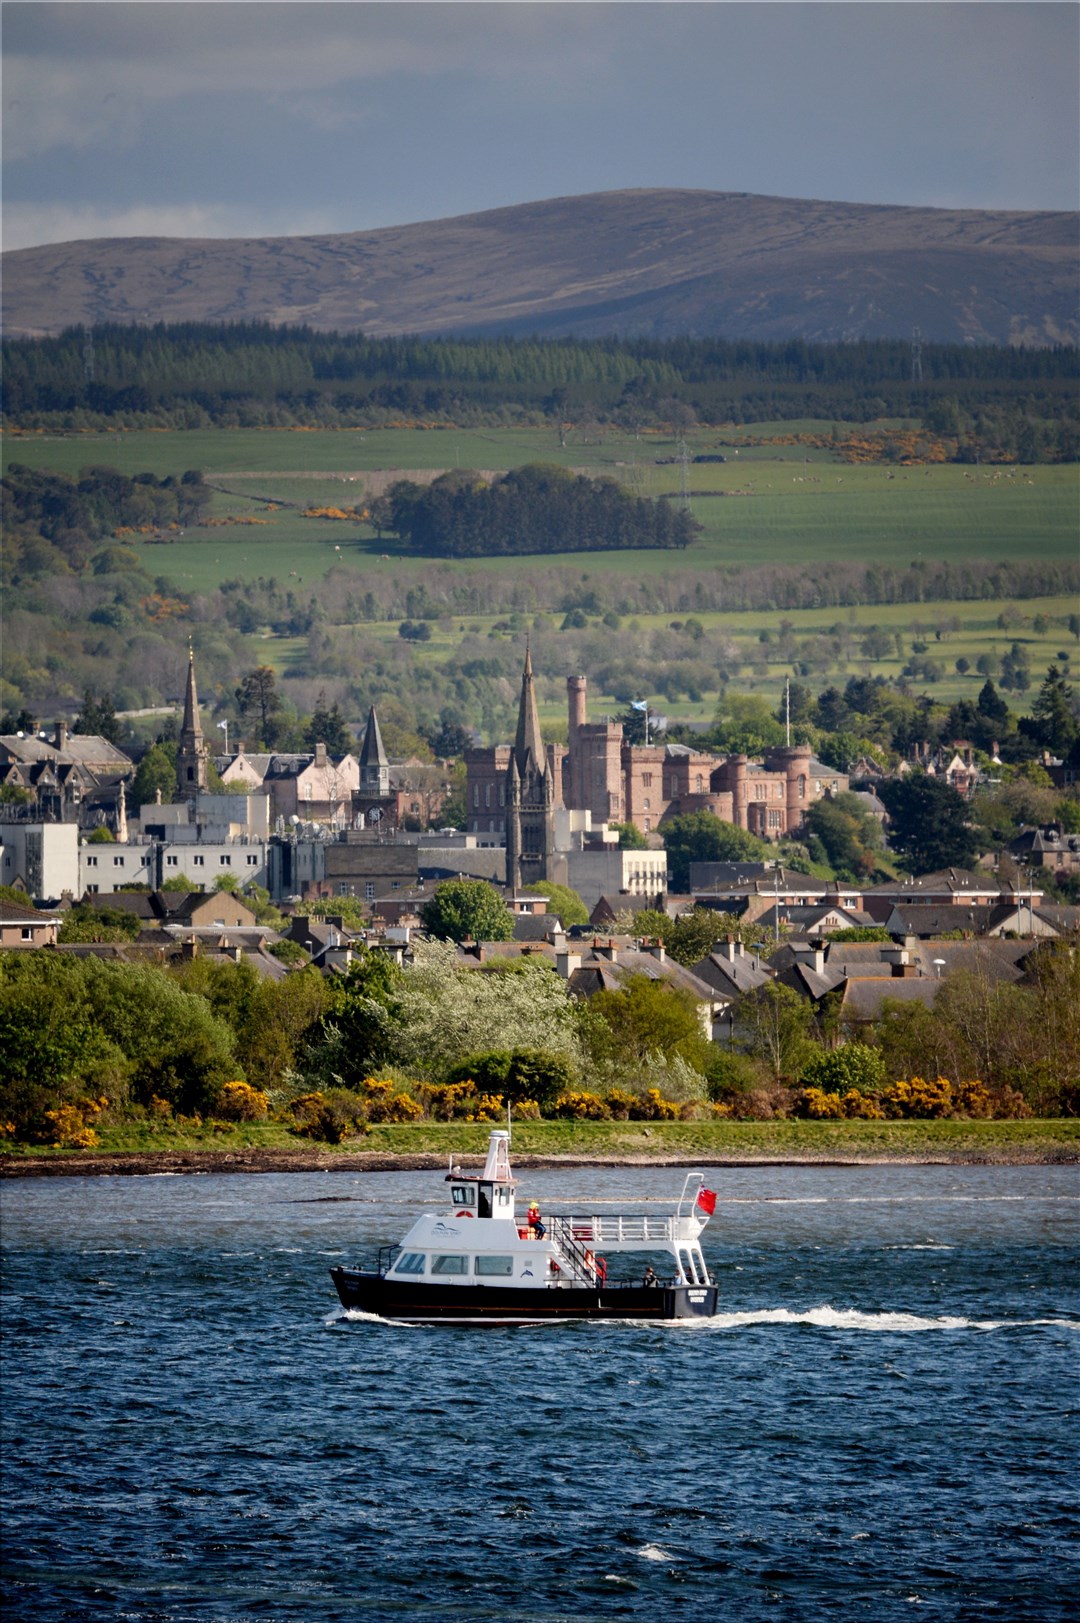 The Dolphin Spirit boat sails through the waters of the Beauly Firth, with Inverness in the background. Picture: Gair Fraser.